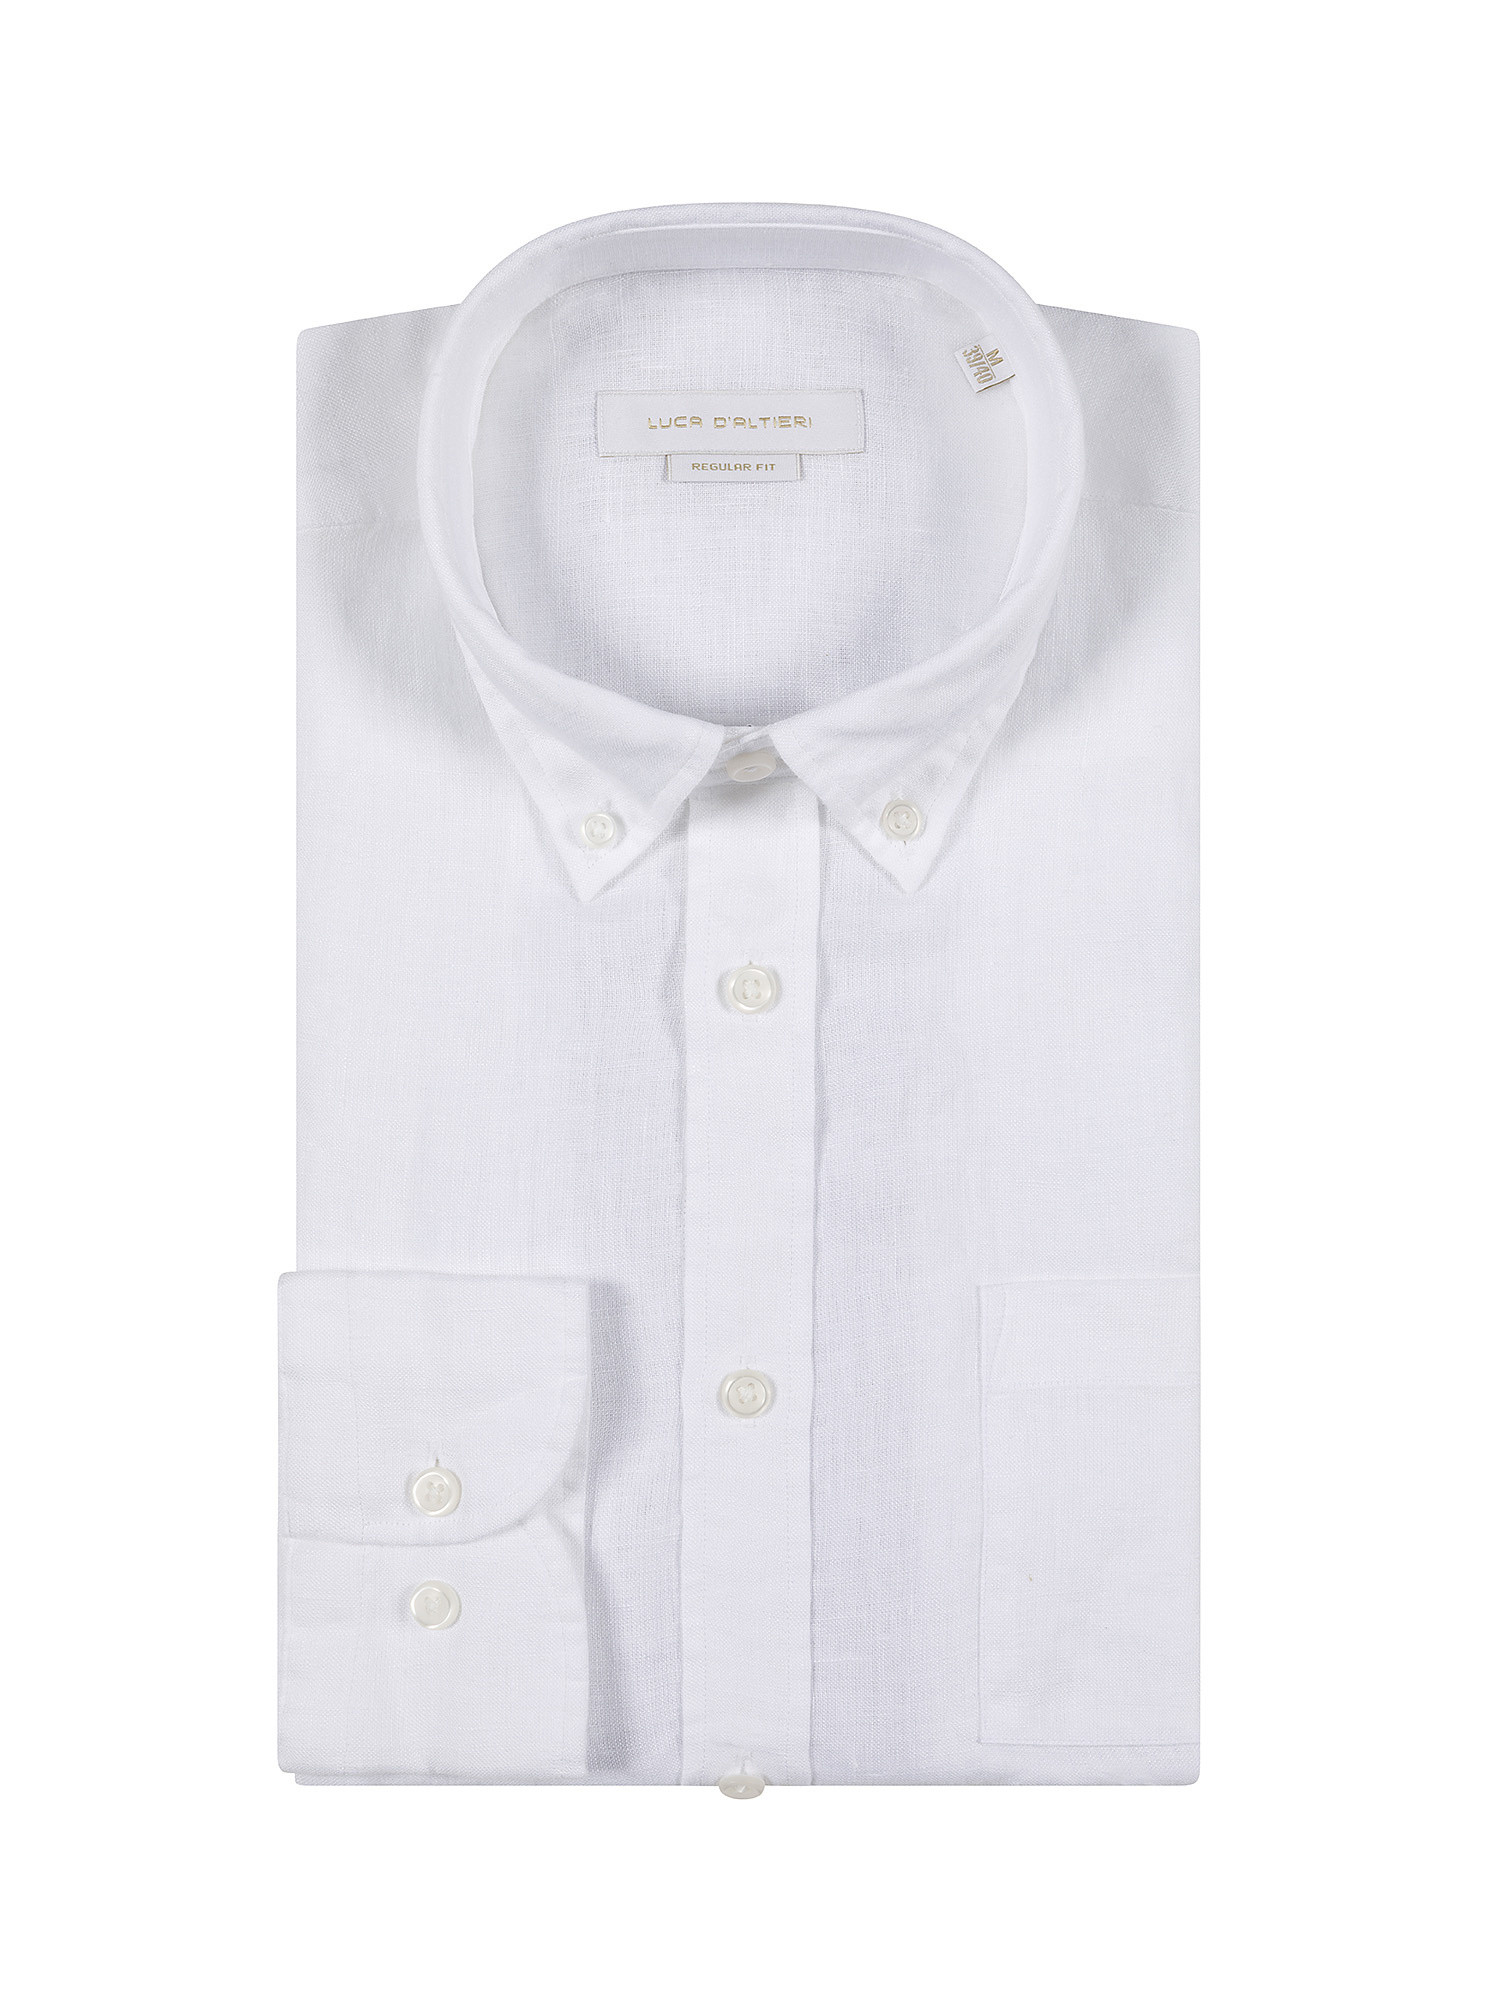 Camicia tailor fit in lino, Bianco, large image number 2